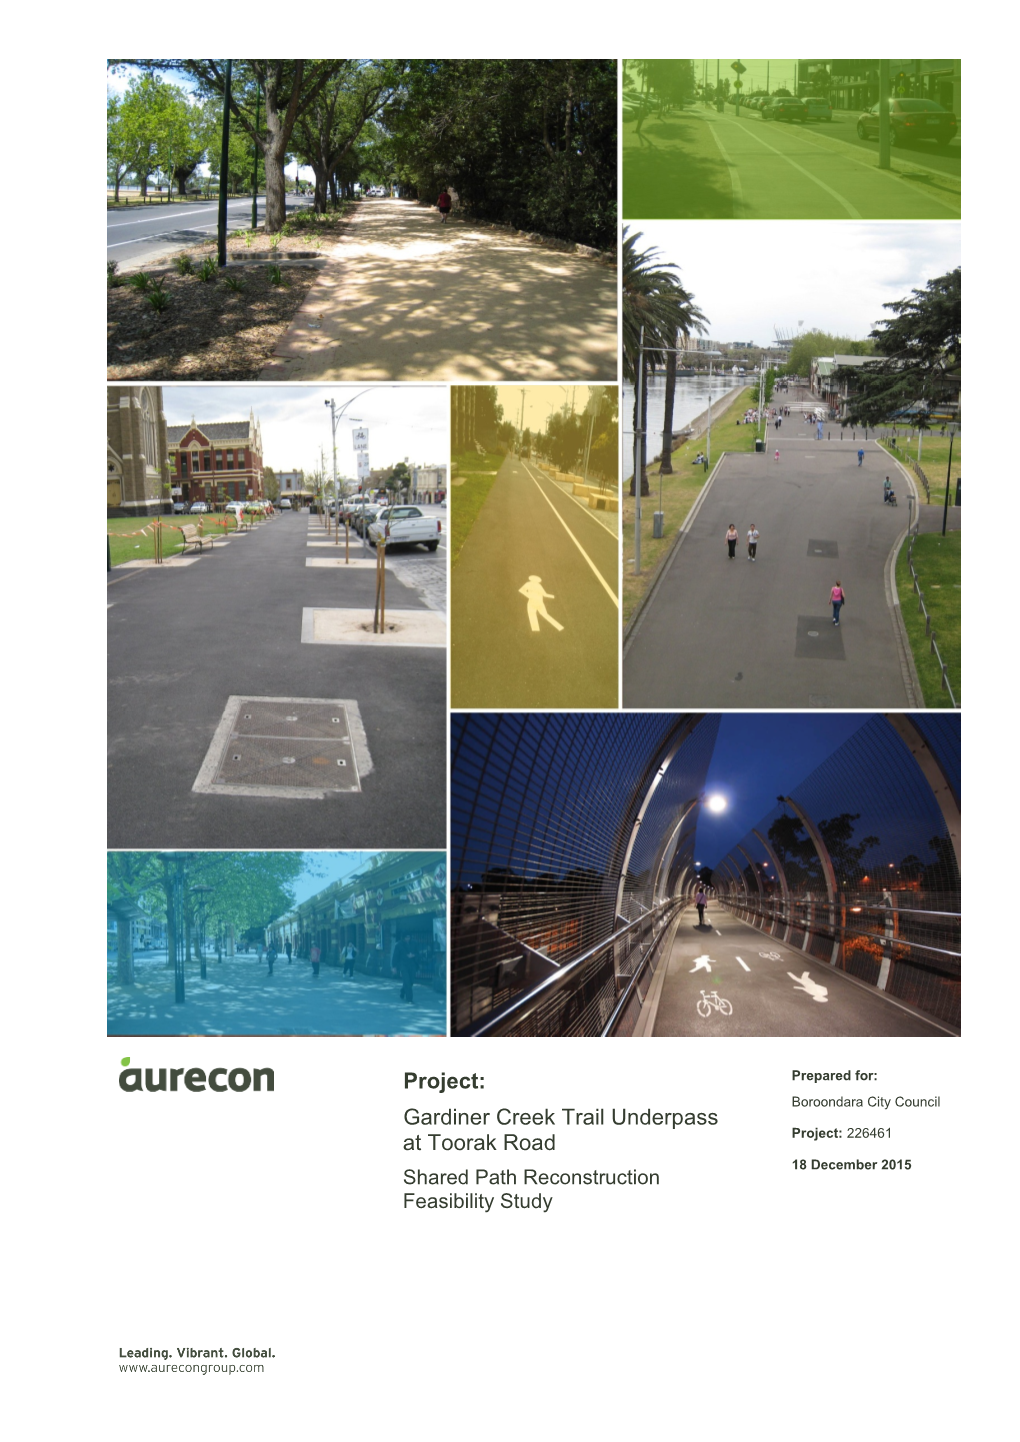 Gardiner Creek Trail Underpass at Toorak Road and Improve the Shared Path Approaches to the Underpass